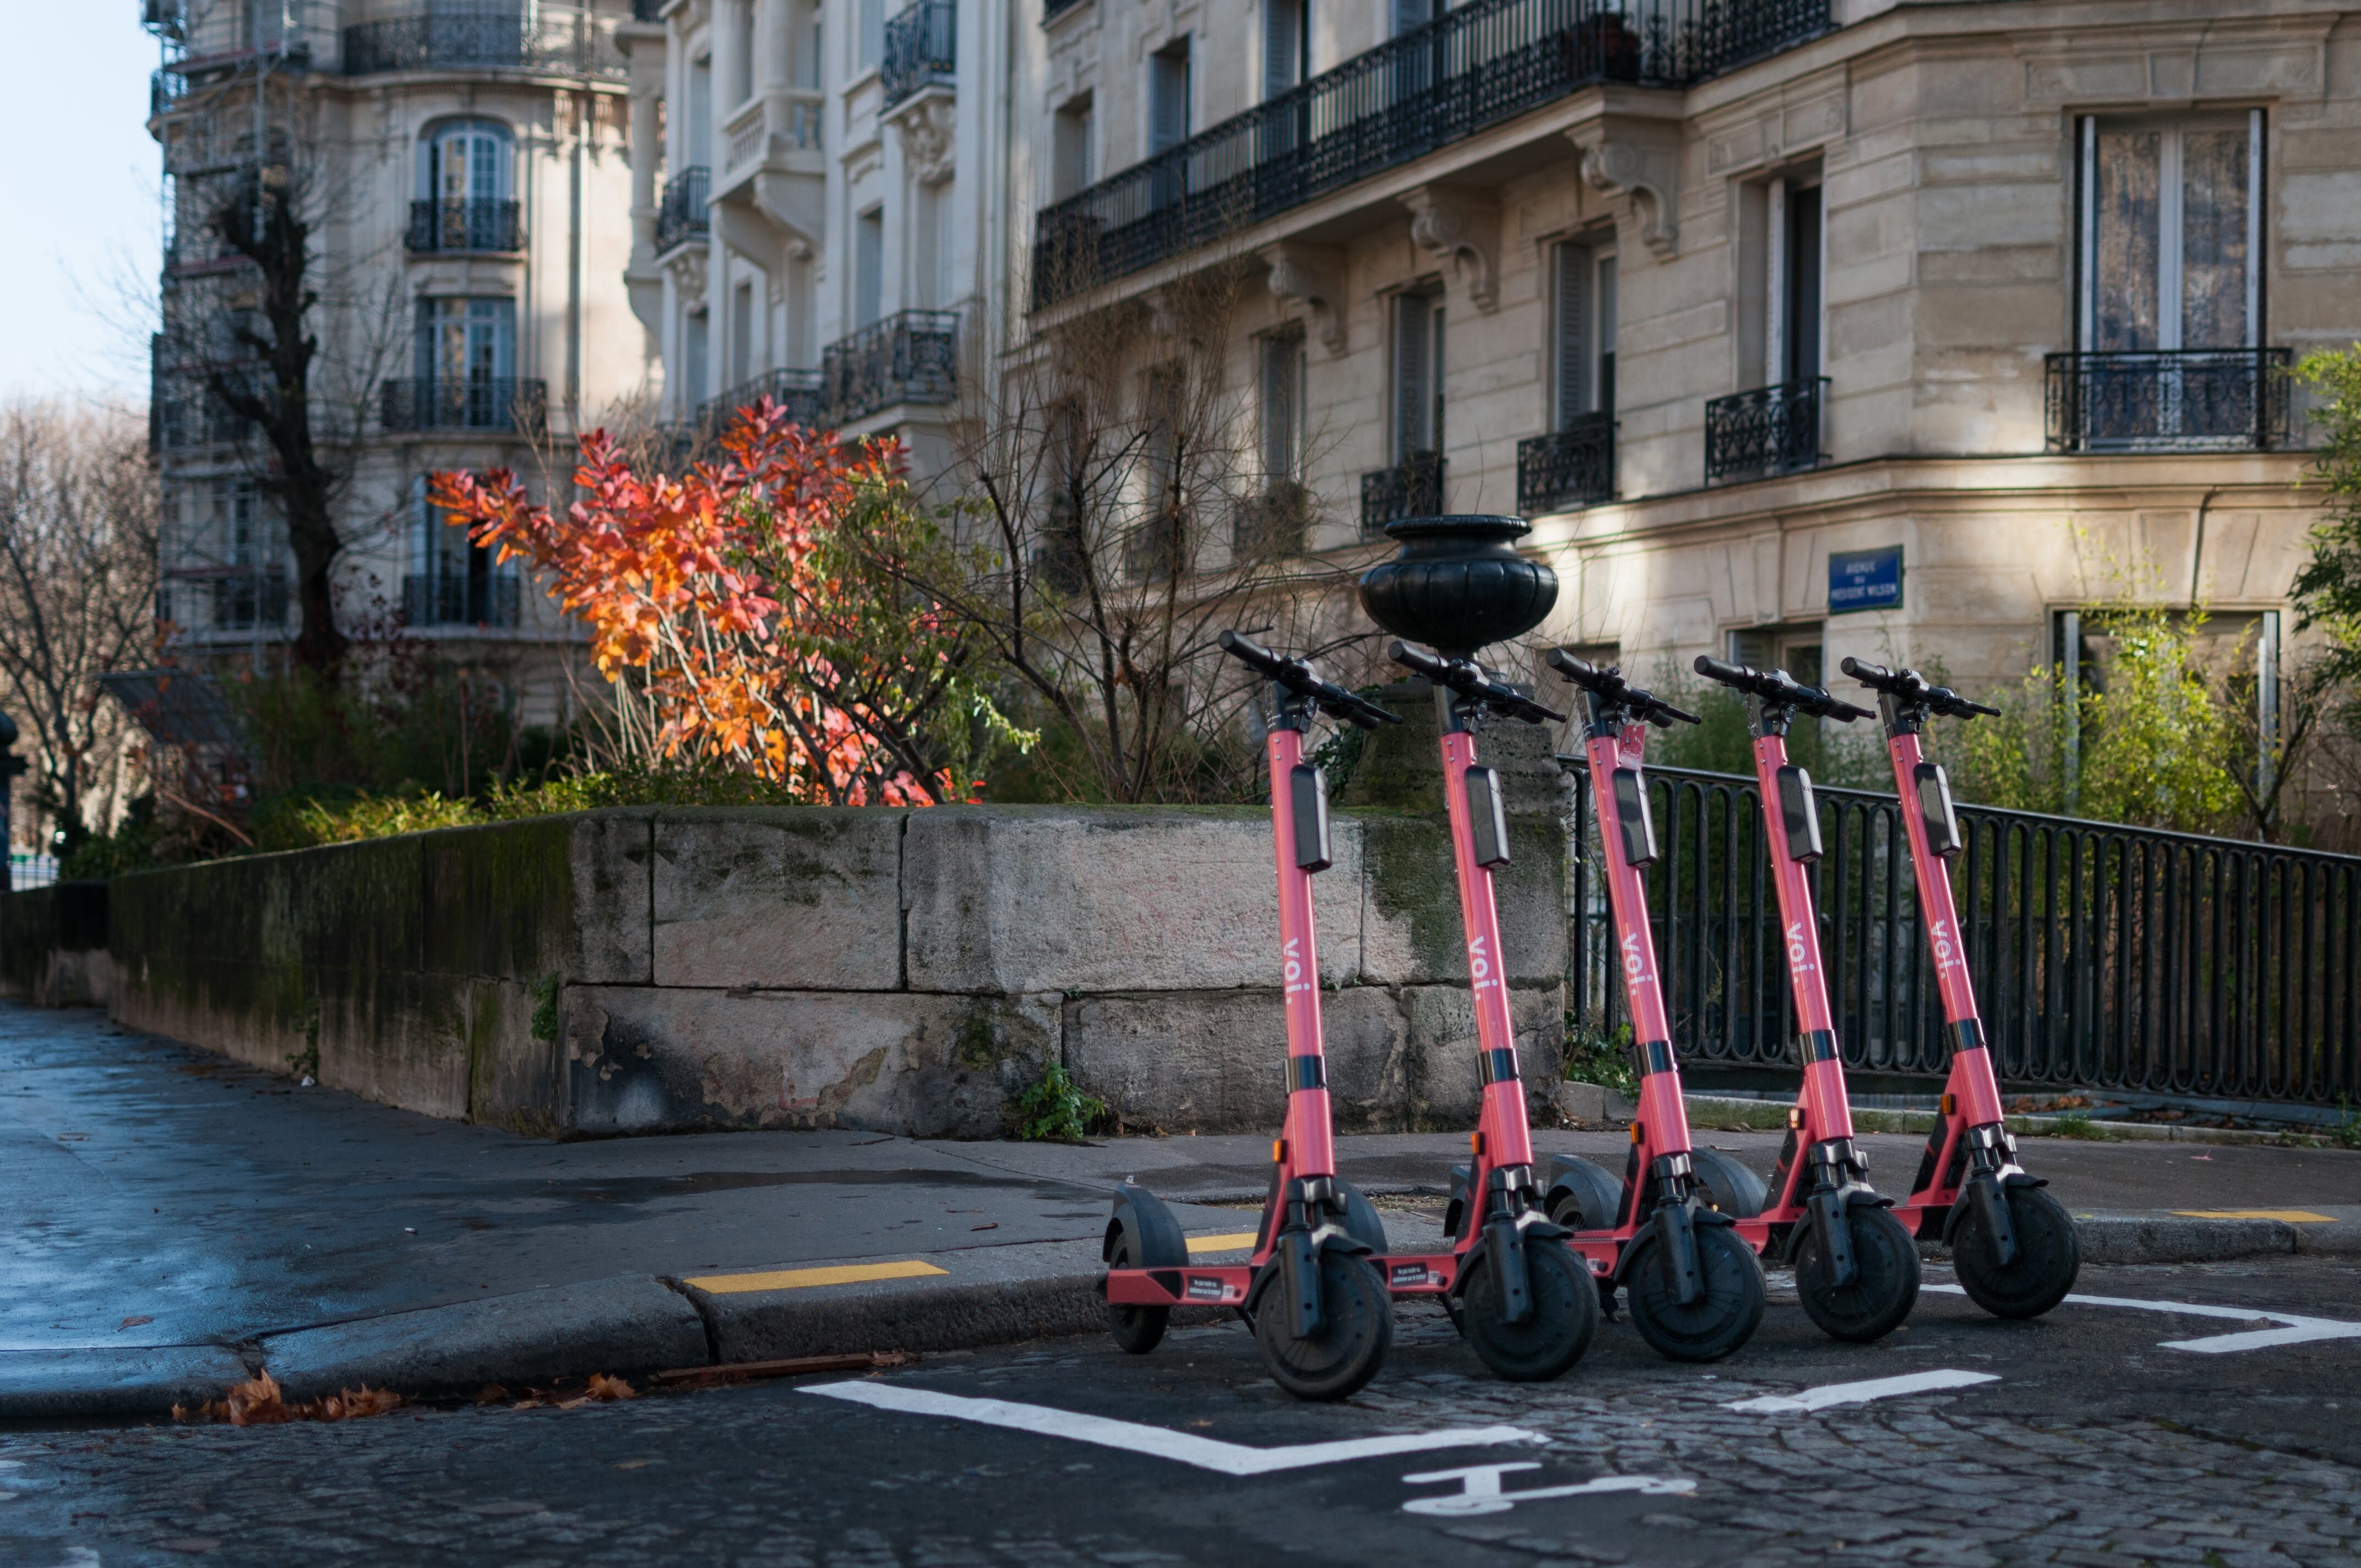 Electric Scooters, E-Scooters